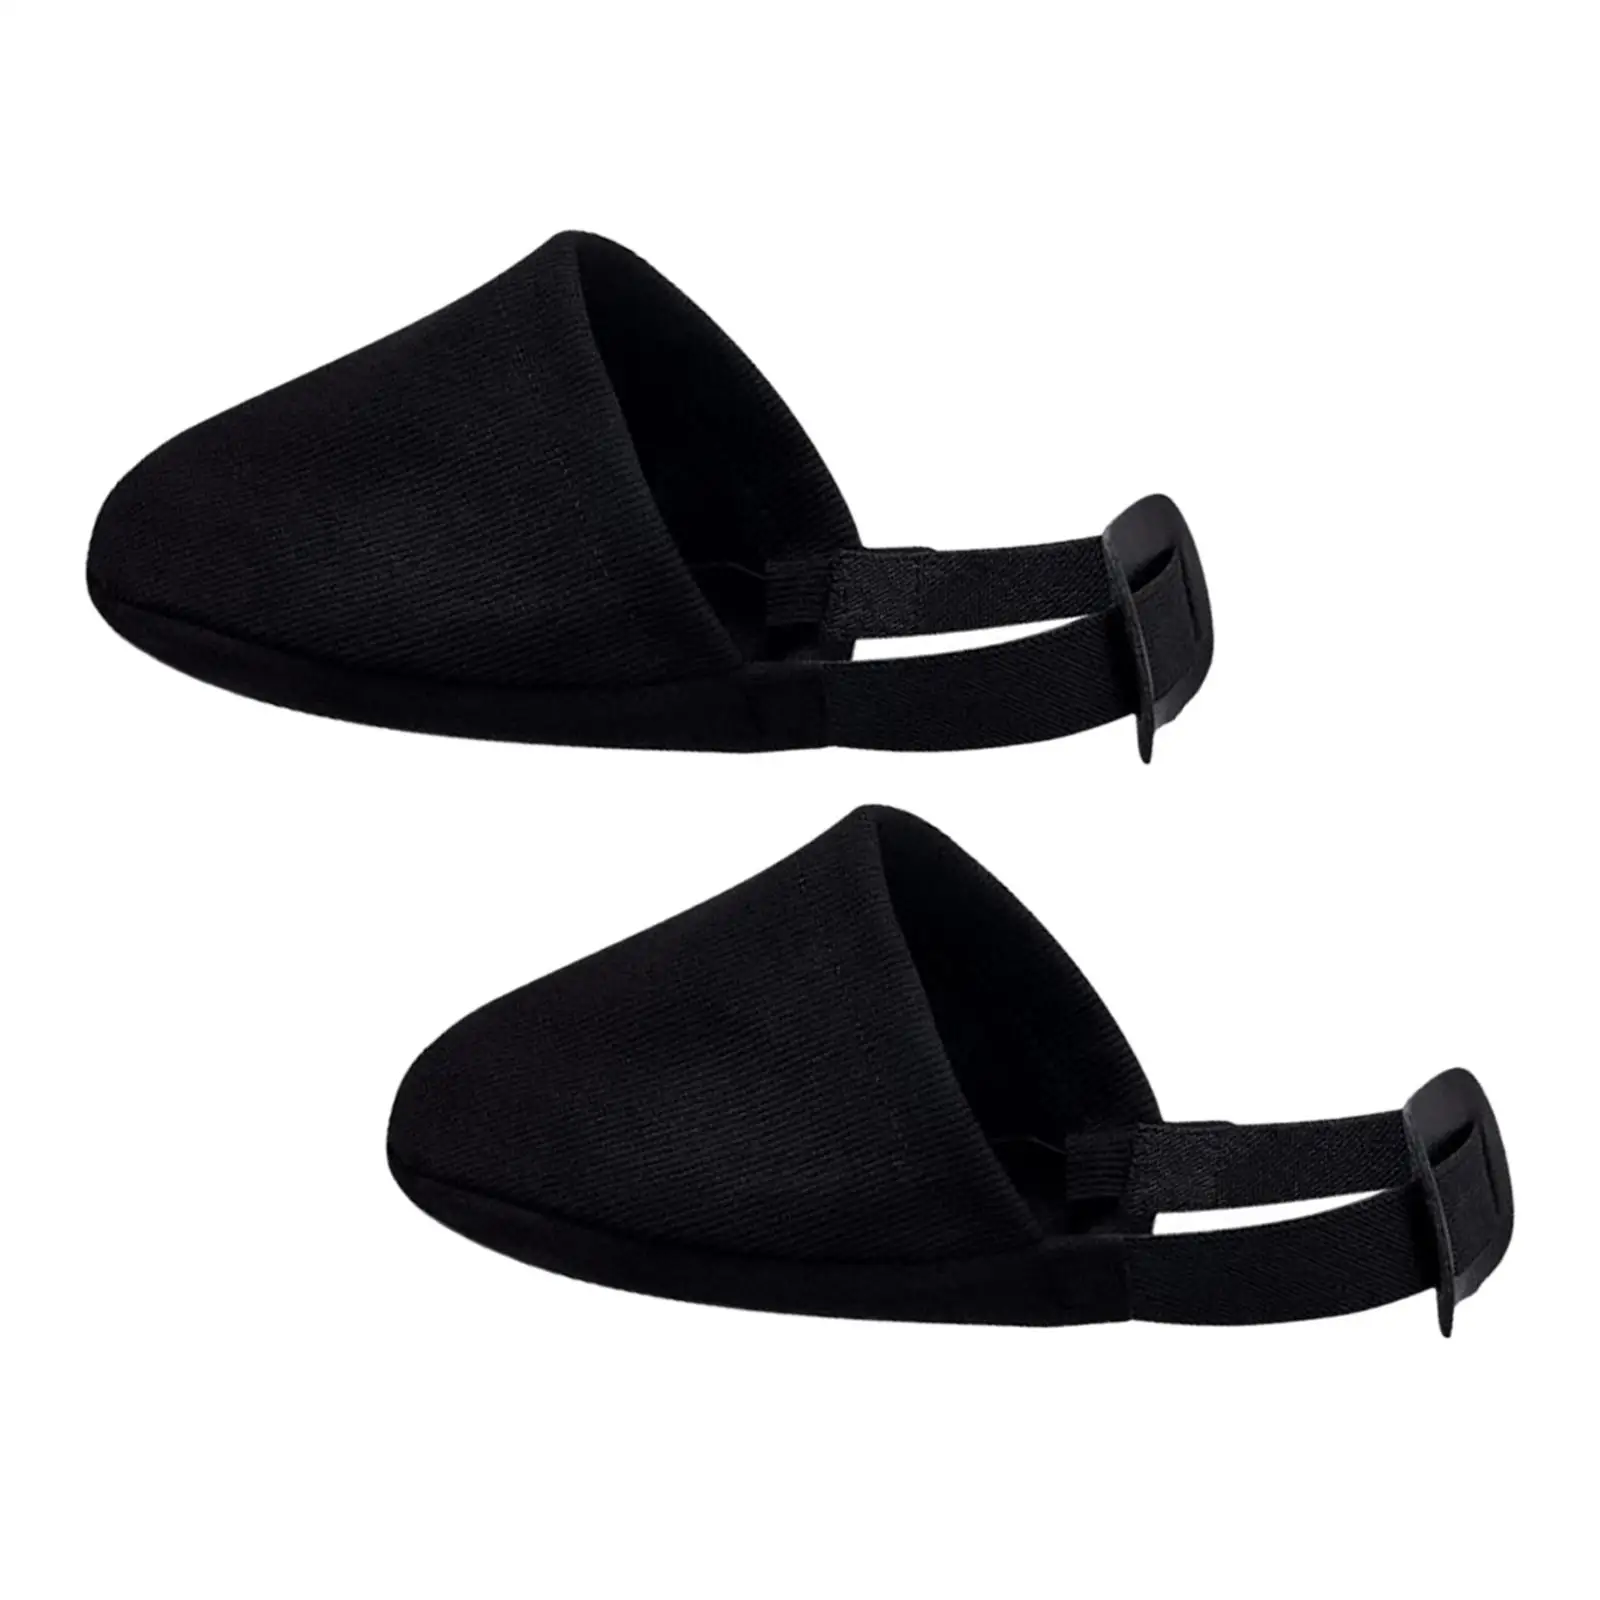 1 Pair Shoe Sliders Black Indoor Protector Covers Bowling Accessories Cleaning Unisex Bowling Shoe Cover for Carpet Adults Kids